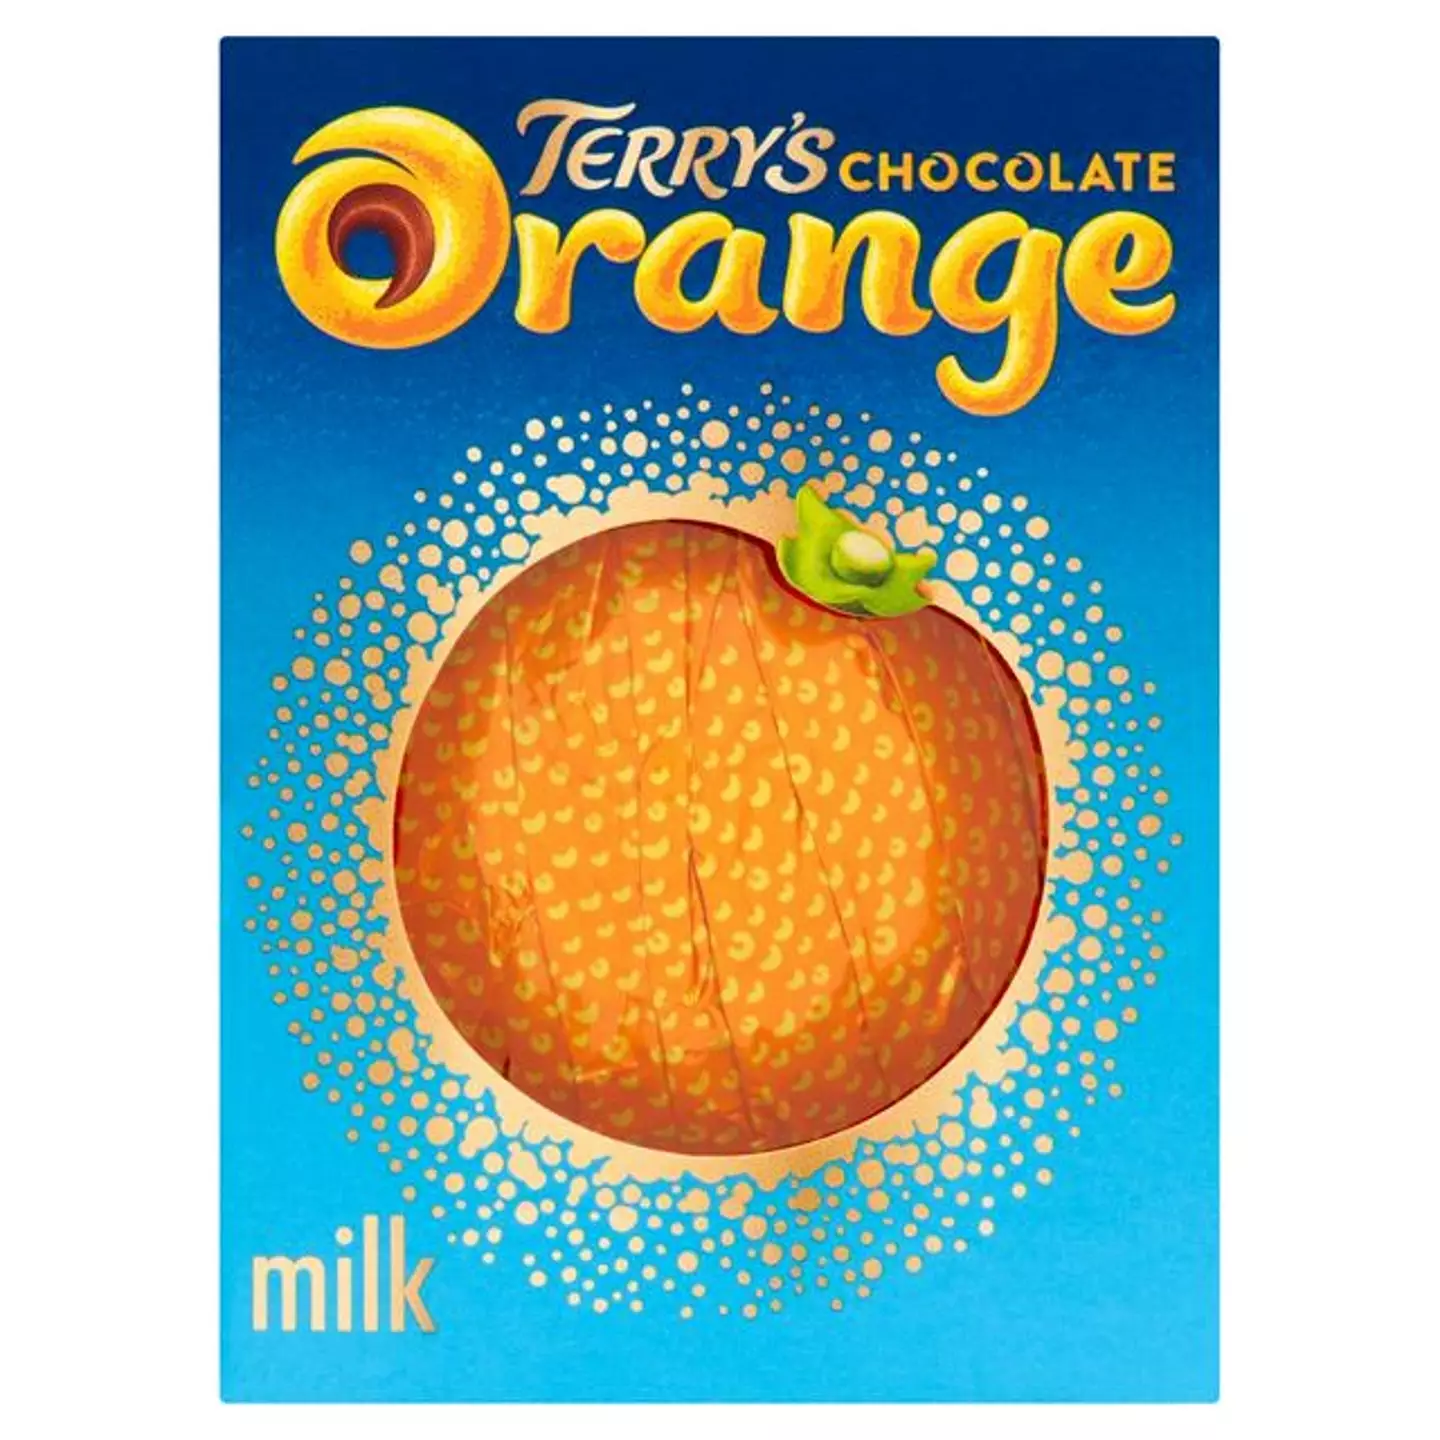 Chocolate Orange is the flavour of the minute. (